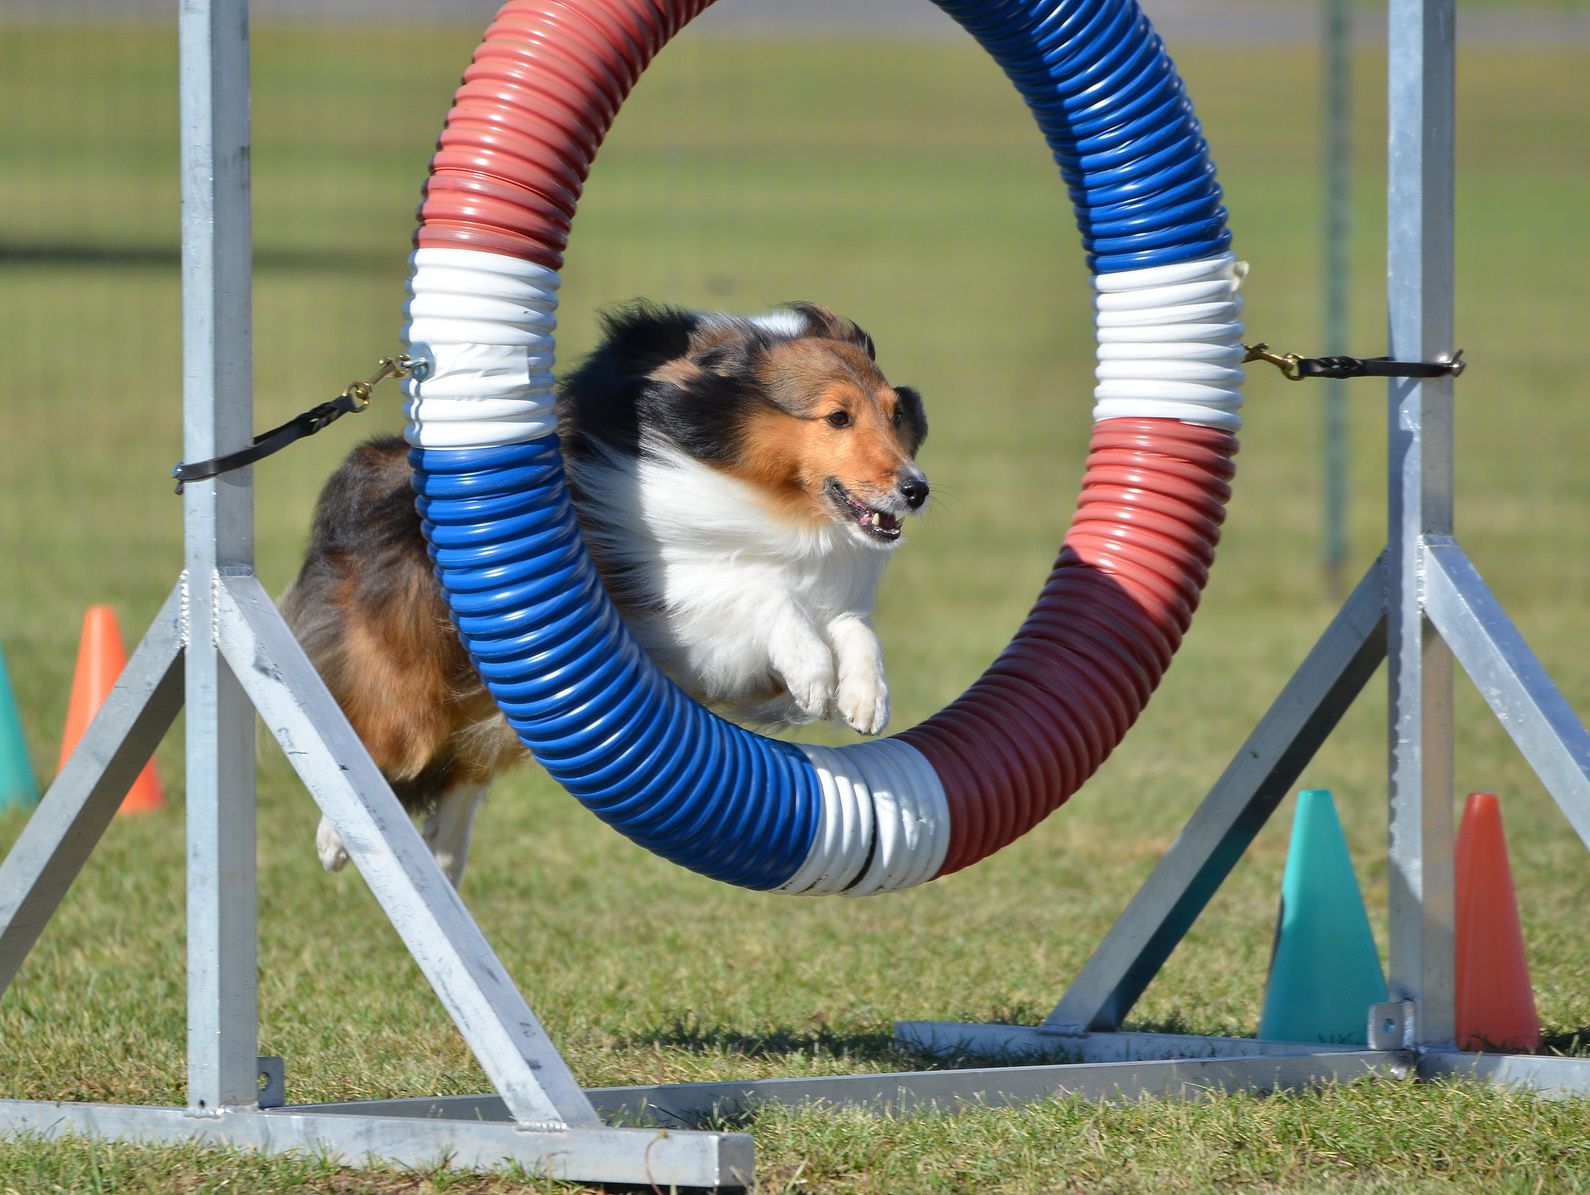 Tricolor Shetland Sheepdog (Sheltie) Leaping Through a Tire at Dog Agility Trial